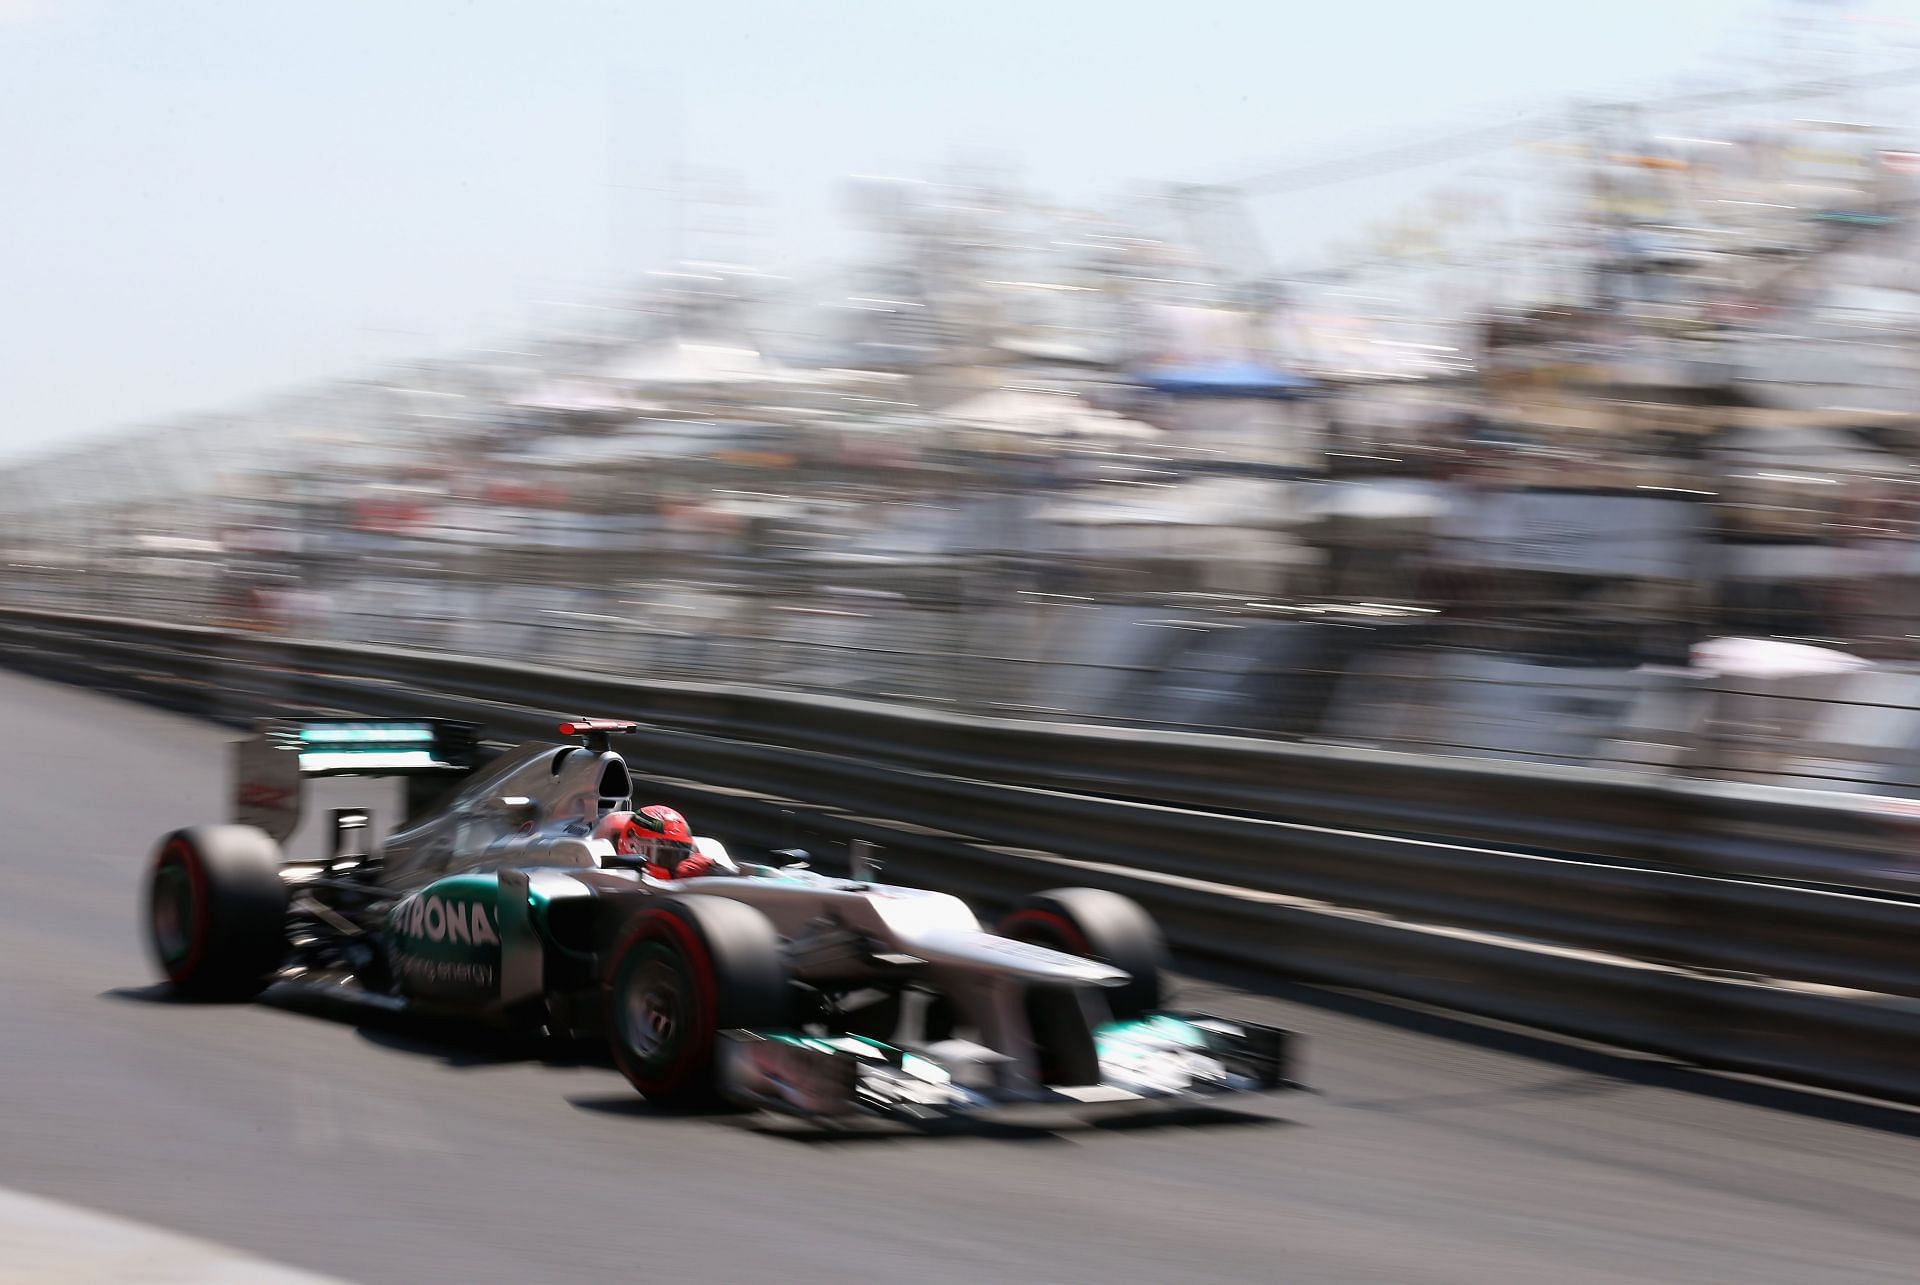 Michael Schumacher in action at the 2012 Monaco Grand Prix qualifying. (Photo by Clive Mason/Getty Images)